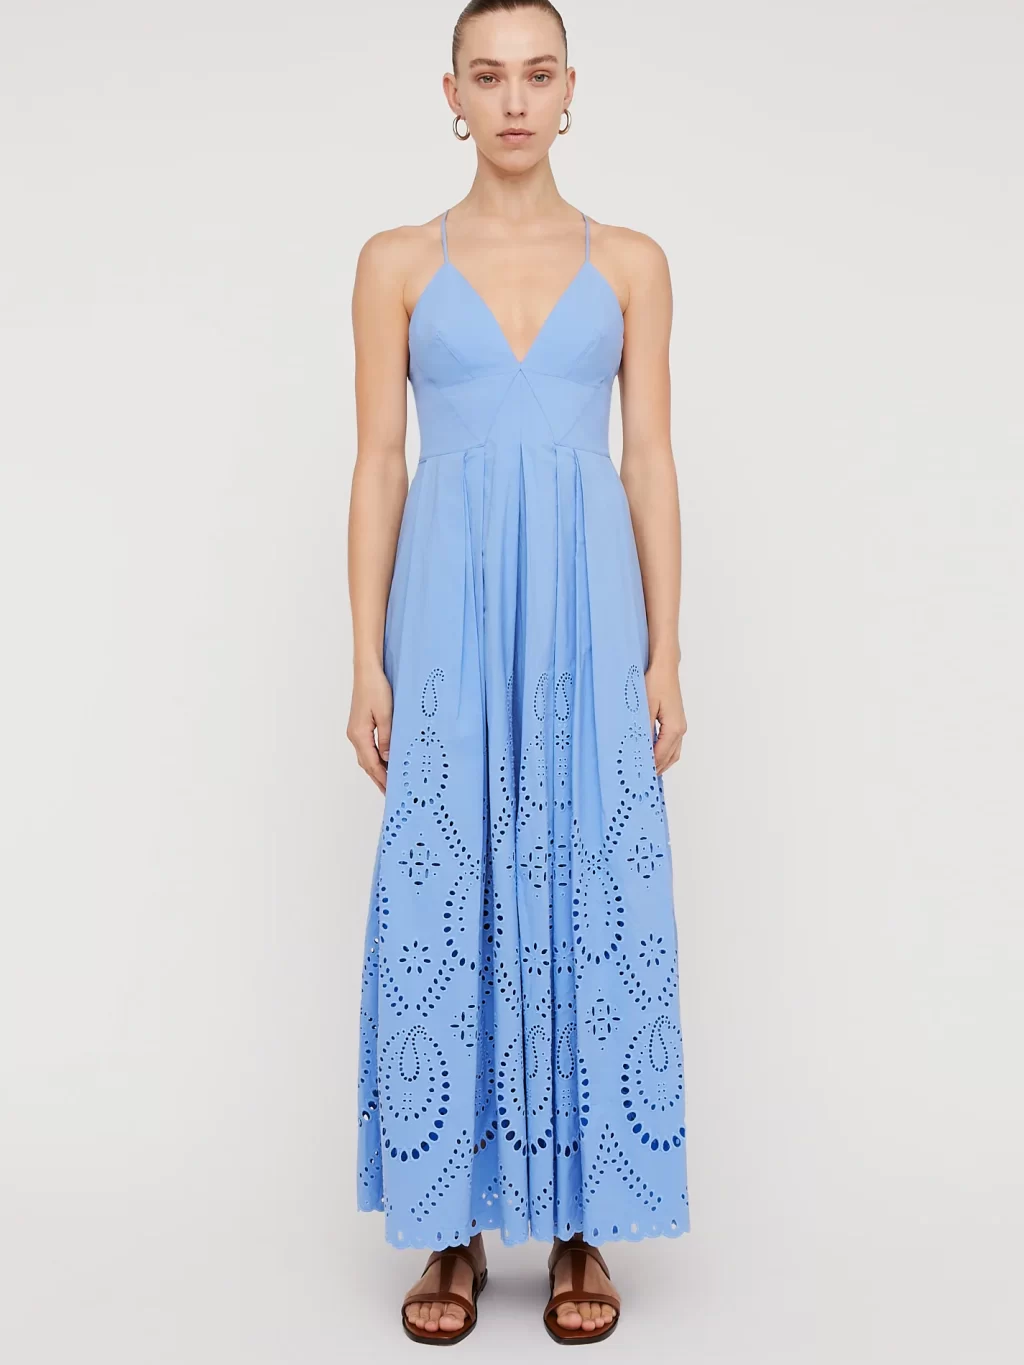 480-H1245012E-EMBROIDERED-SHOESTRING-DRESS-PALE.BLUE-SCANLANTHEODORE-1copy